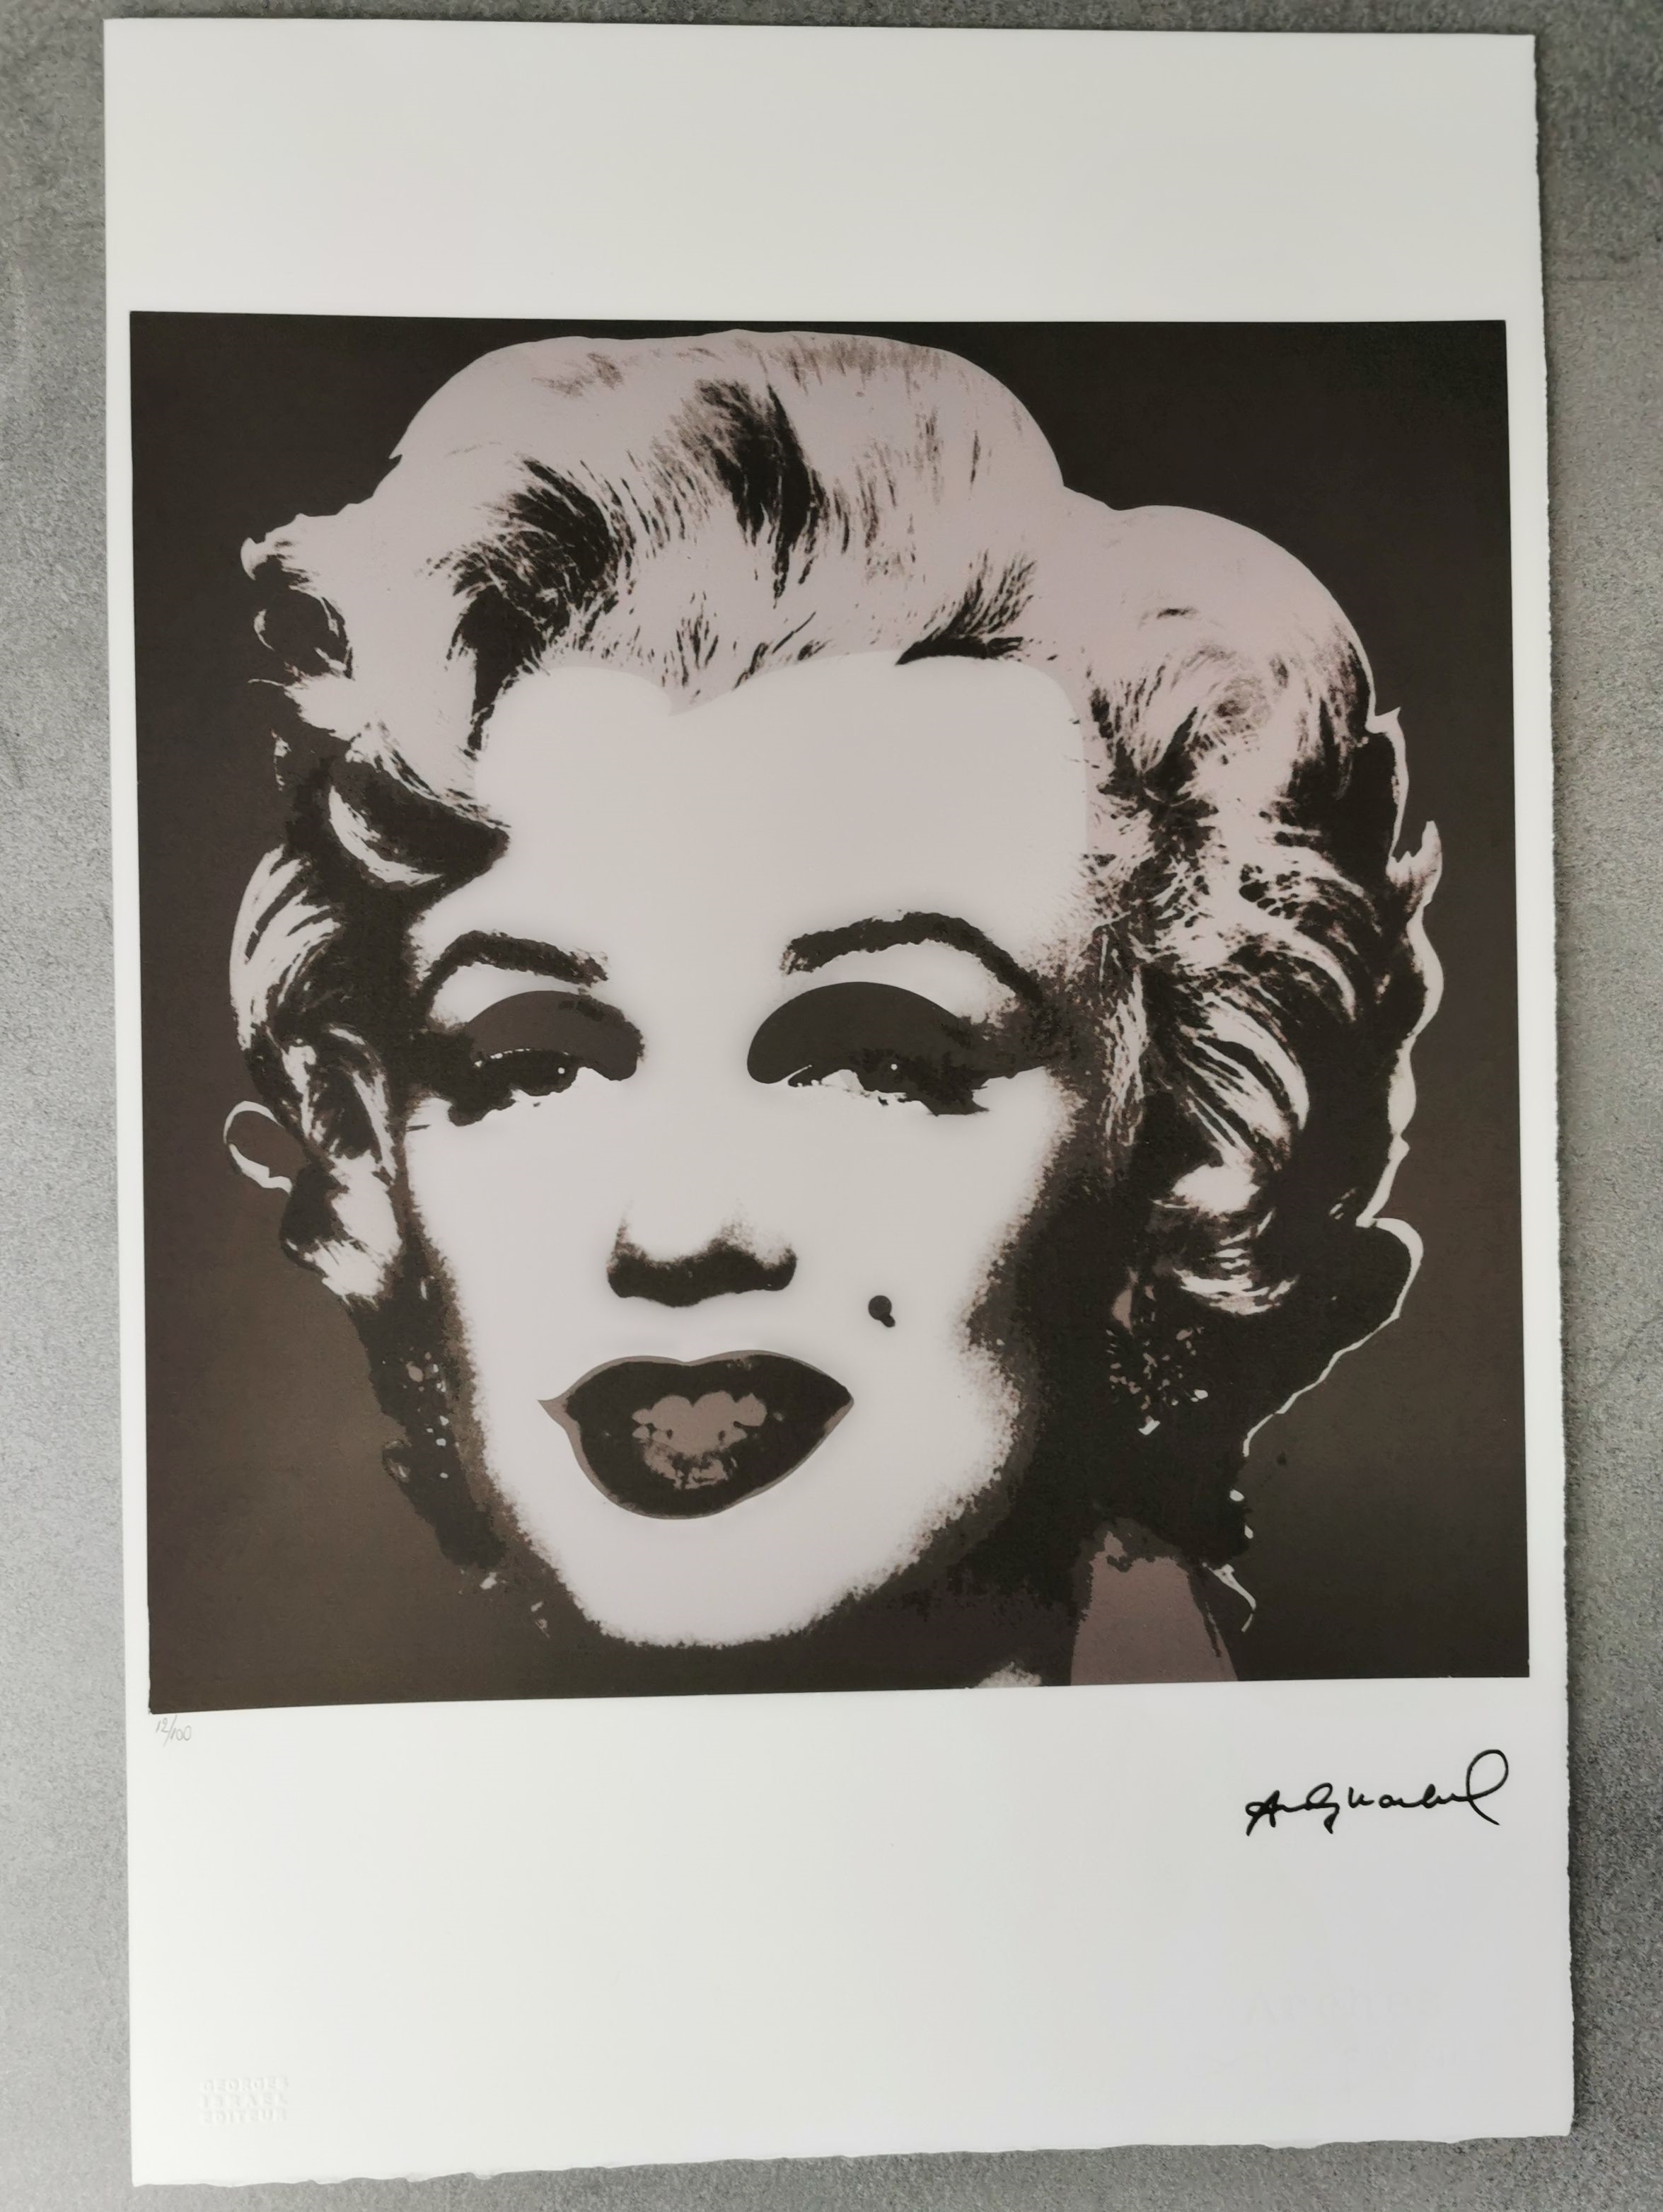 Artwork by Andy Warhol, Marilyn Monroe, Made of Color lithograph on Arches France laid paper with blind stamp